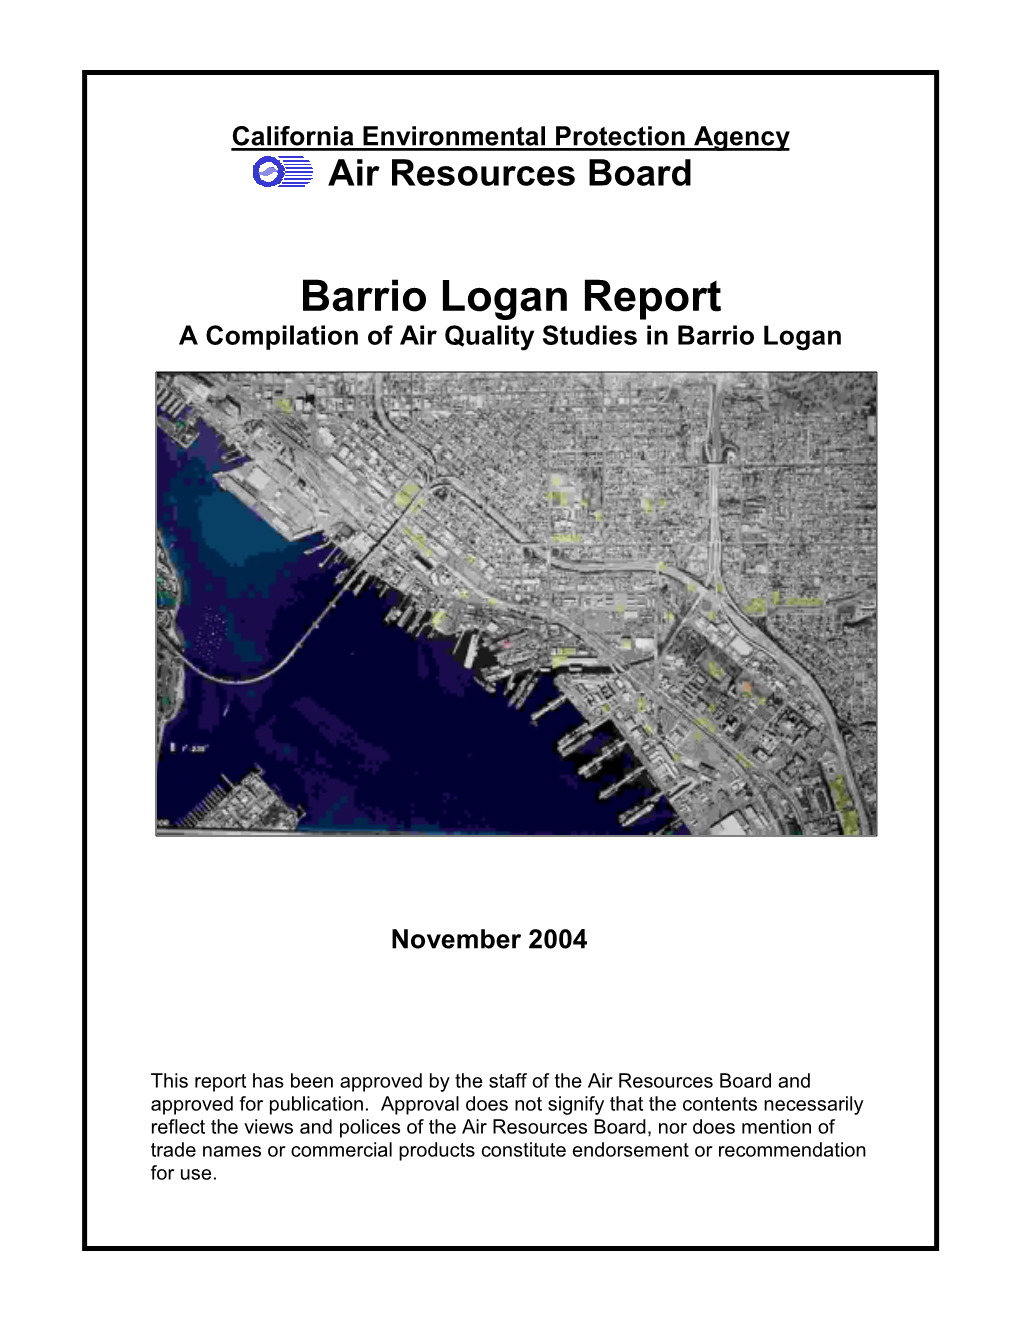 Barrio Logan Report a Compilation of Air Quality Studies in Barrio Logan